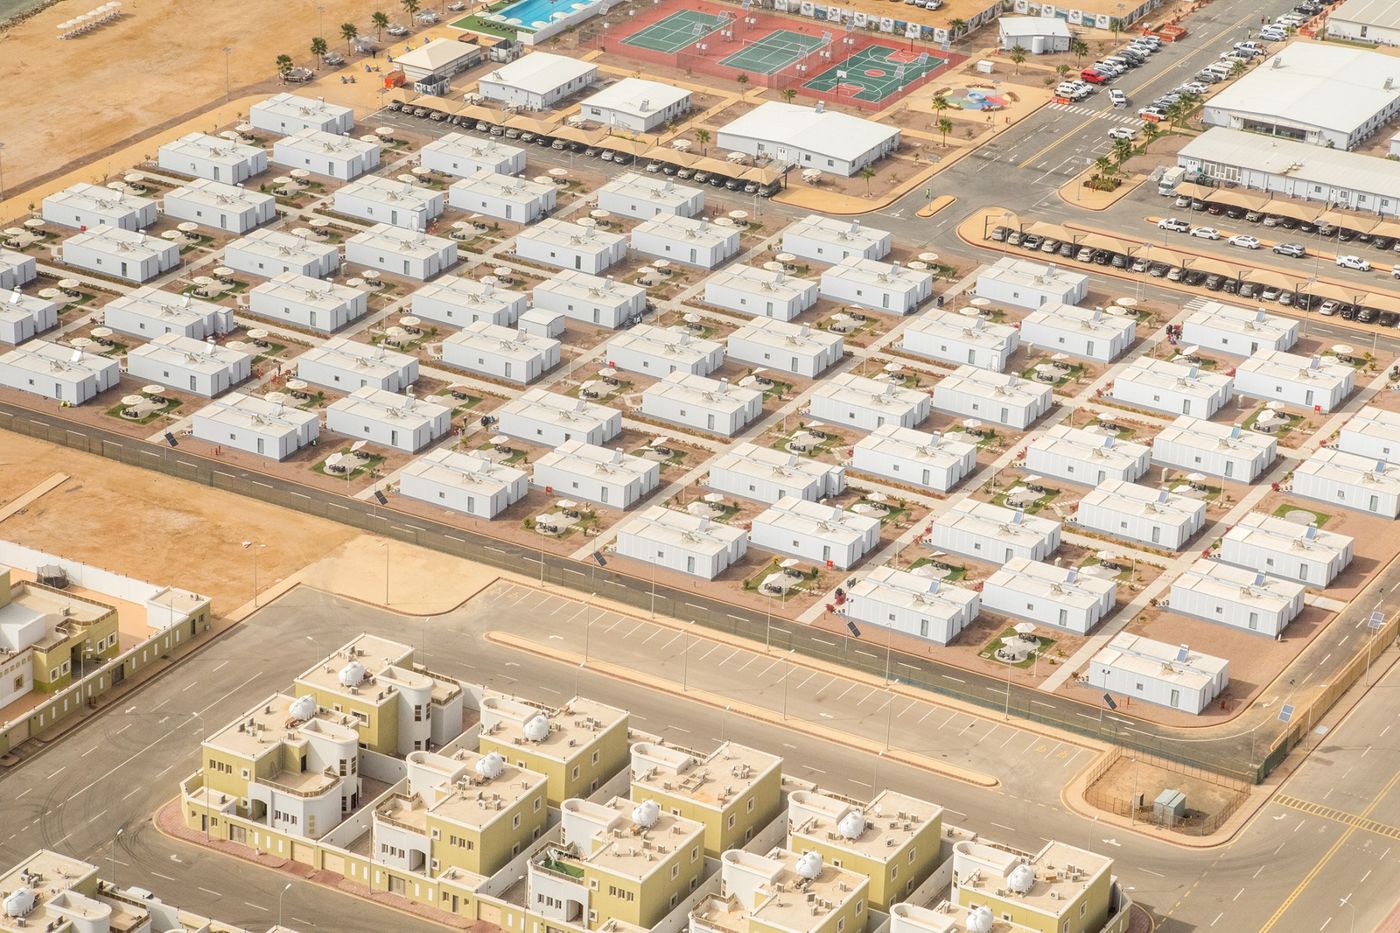 One of Neom's housing complexes for employees. Photographer: Iman Al-Dabbagh